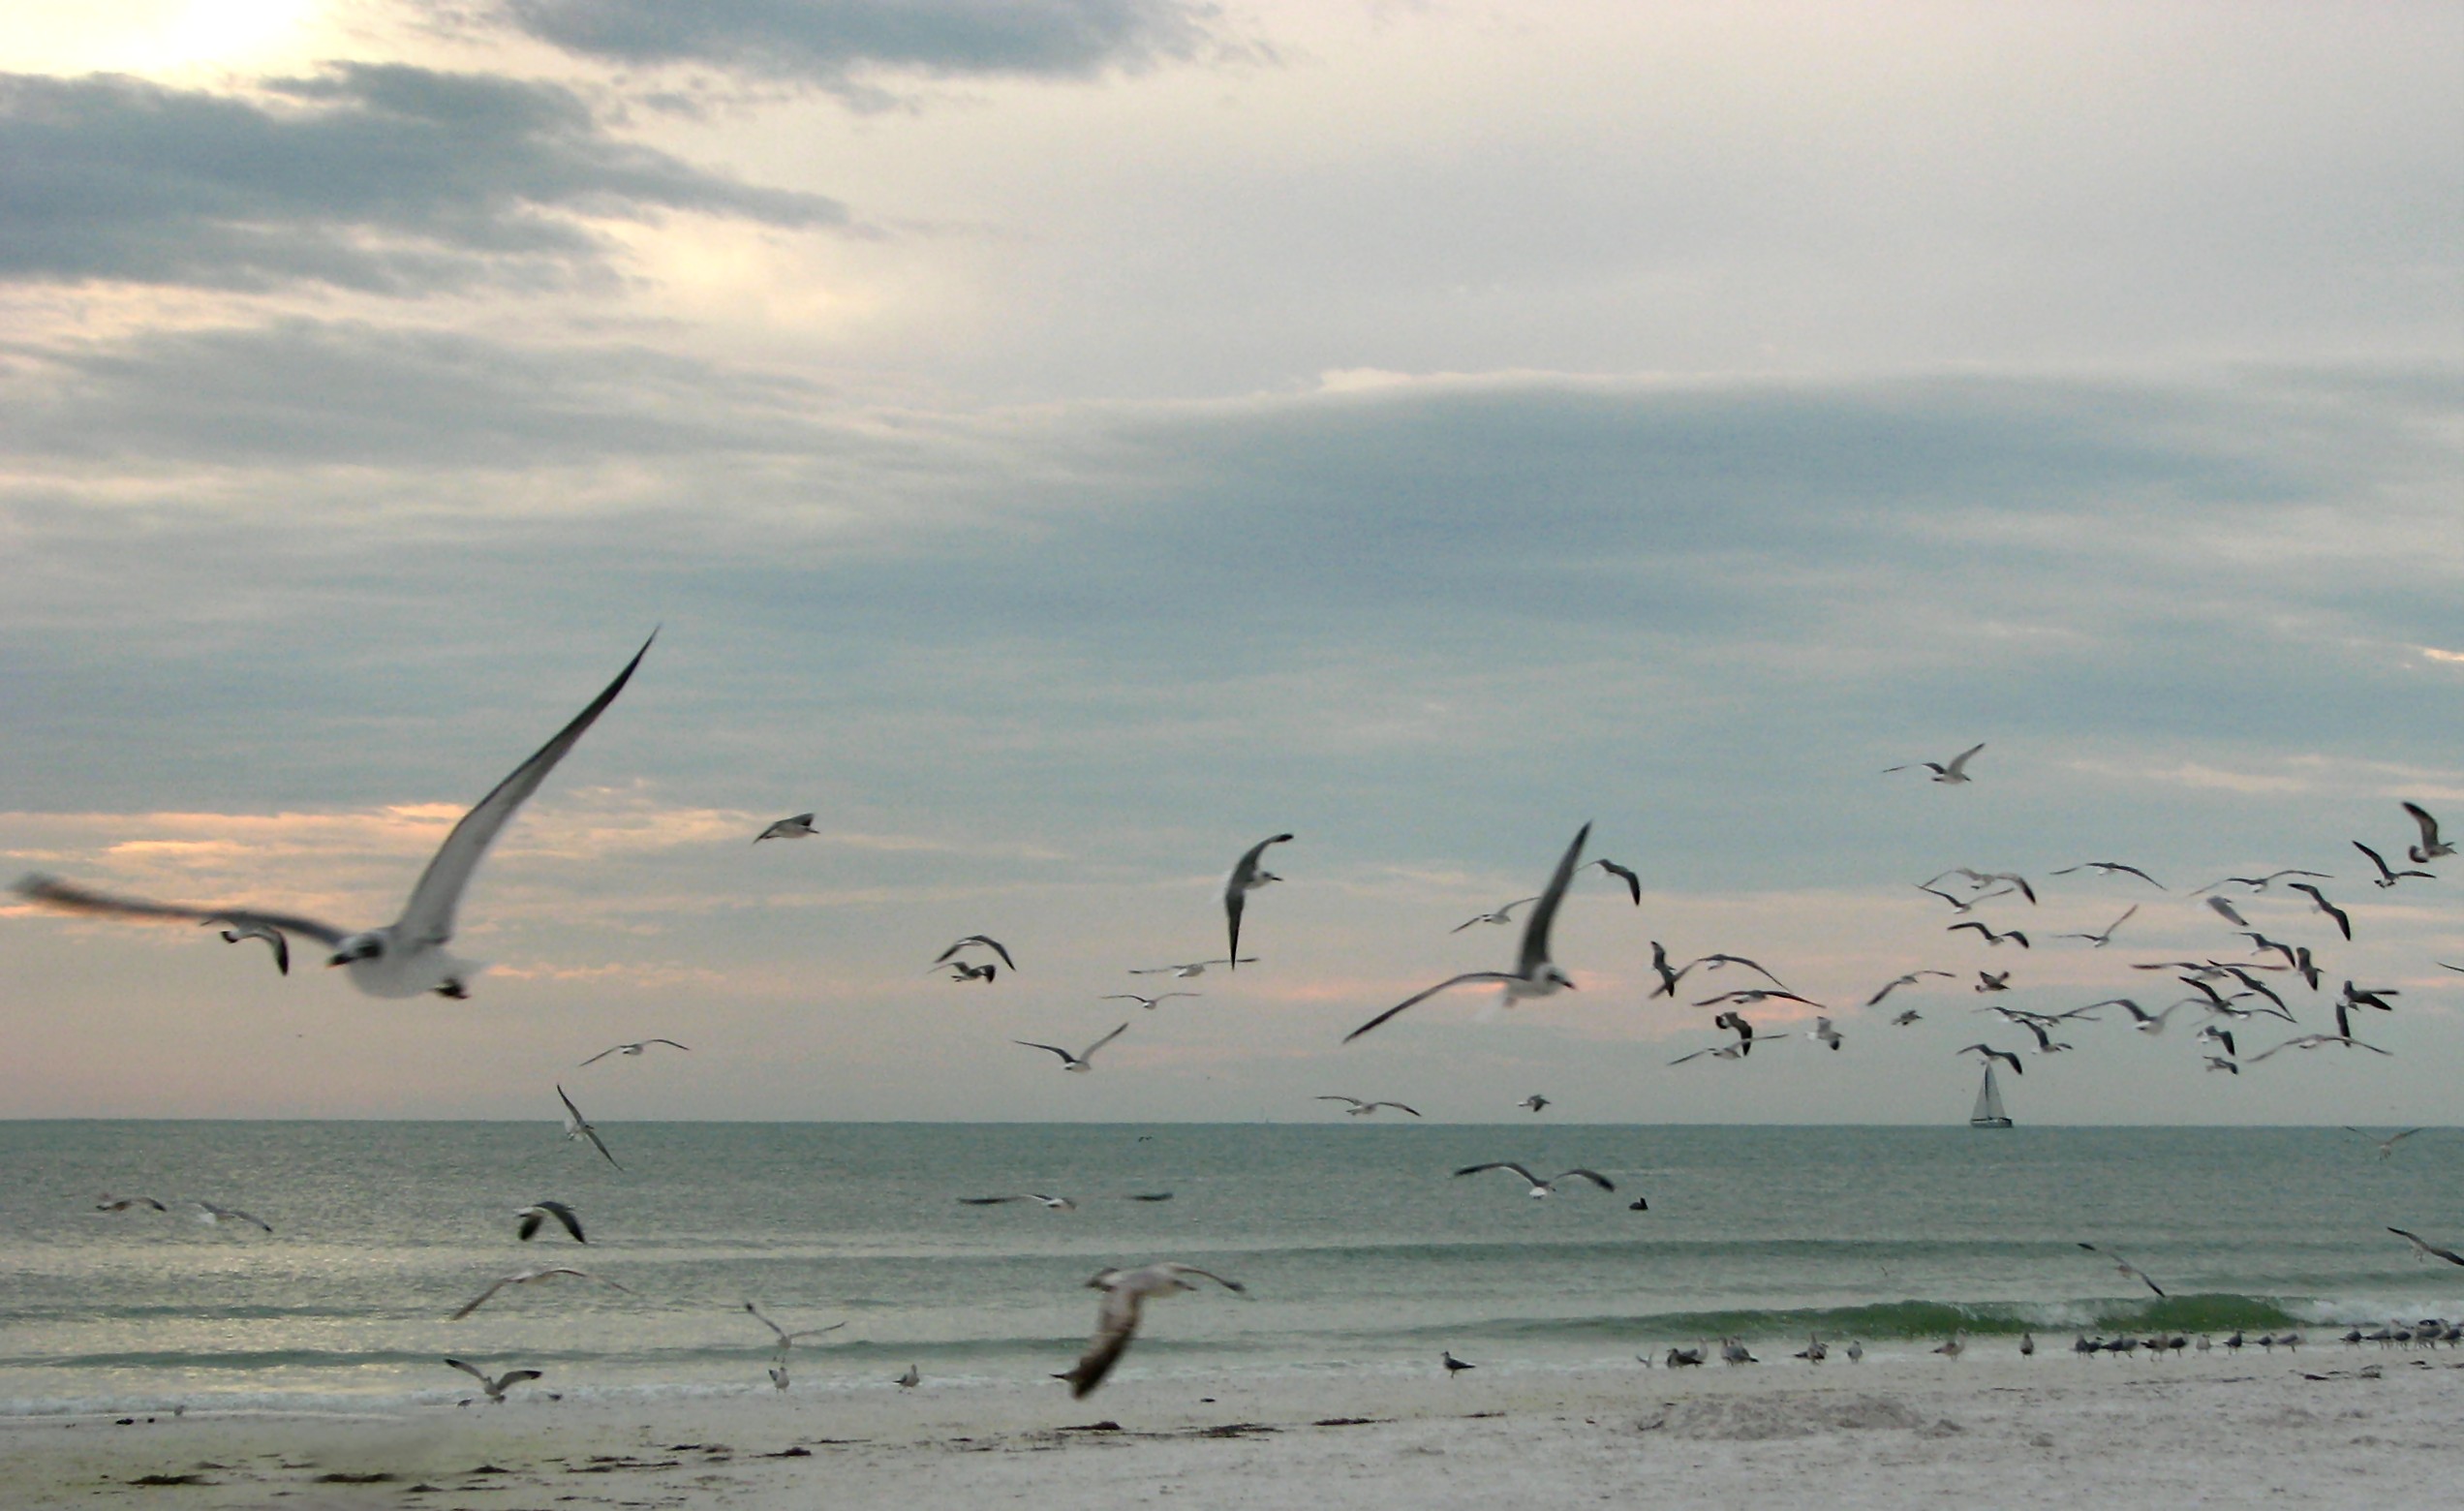 Seagulls flying over the beach at sunset photo